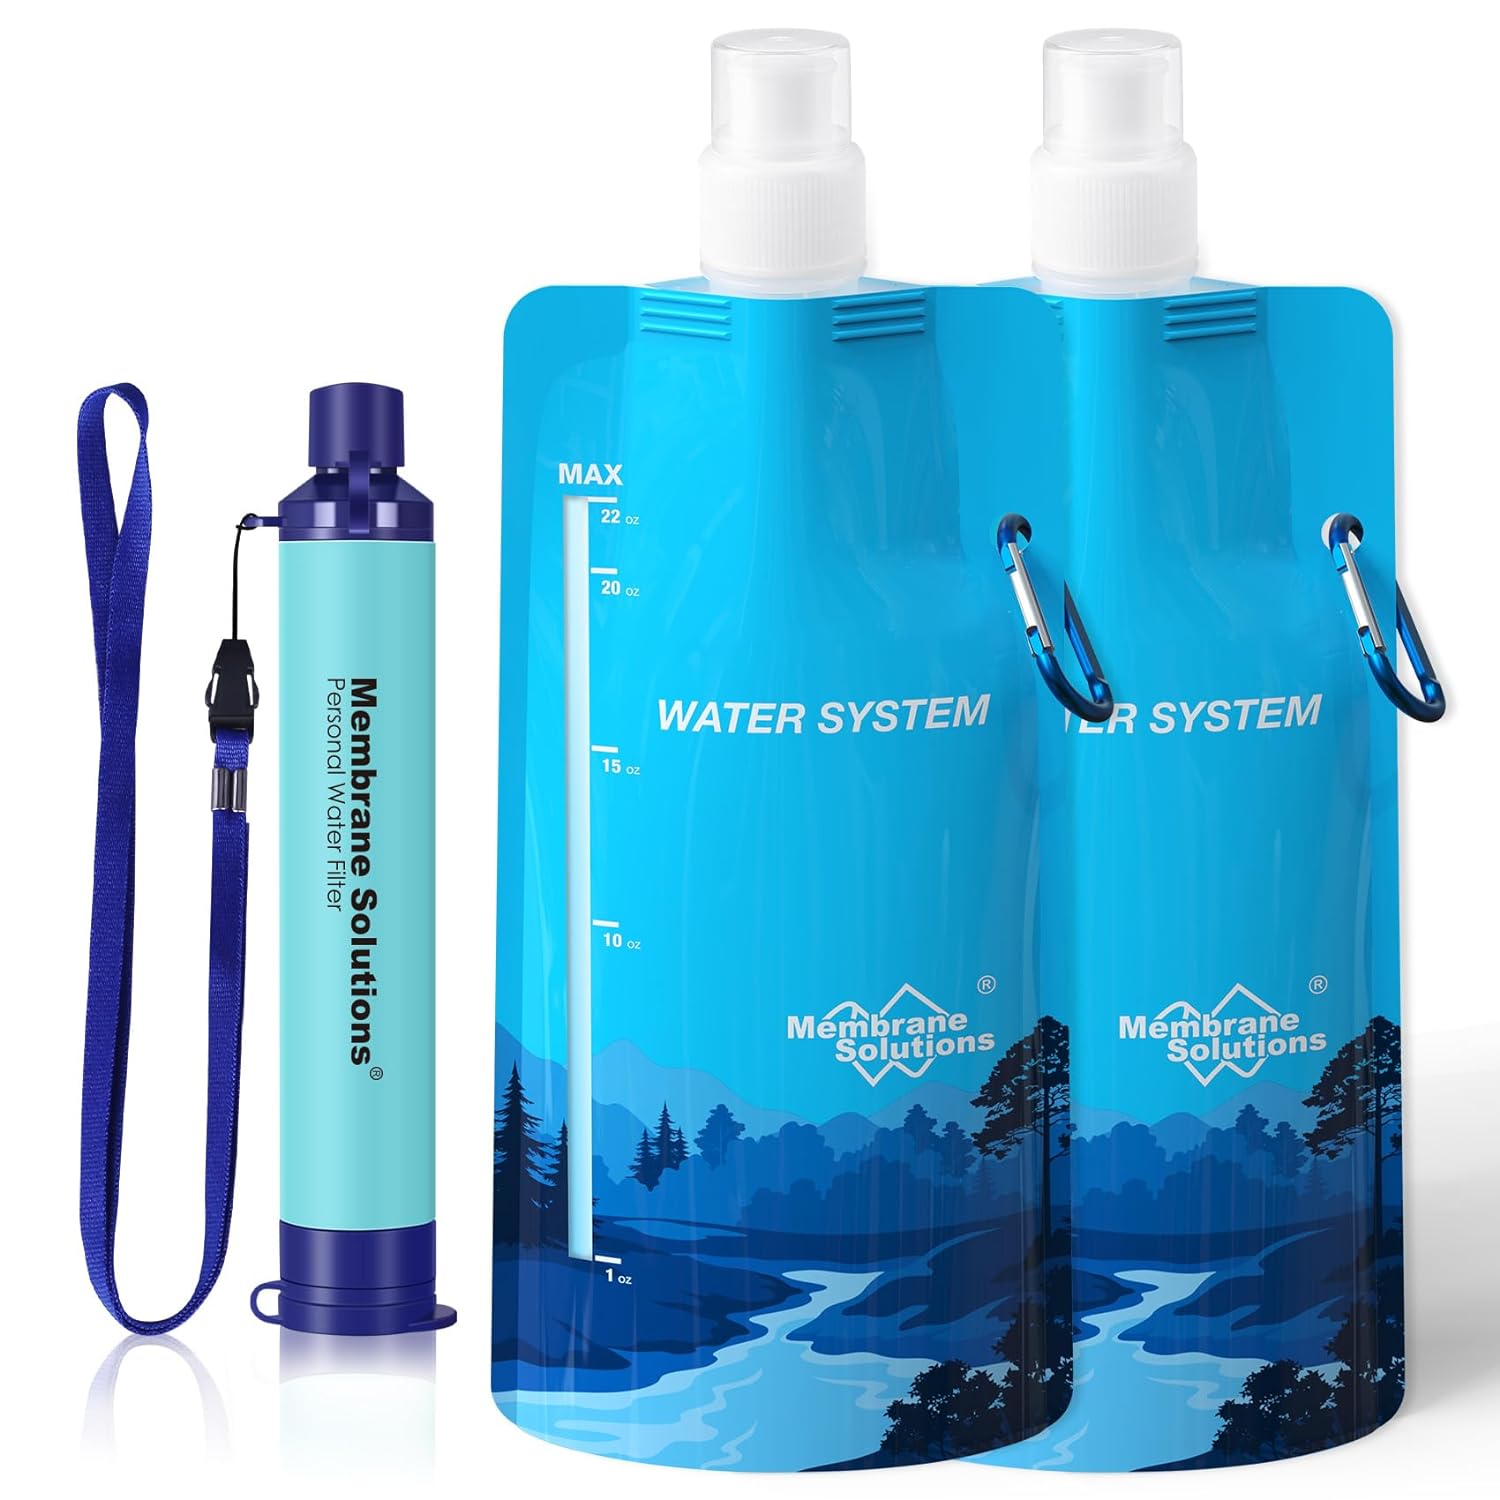 Personal Water Filter, Portable Water Filtration Straw, Emergency Water  Purifier Kit, Outdoor Survival Equipment, Water Fliter For Camping Hiking  Back